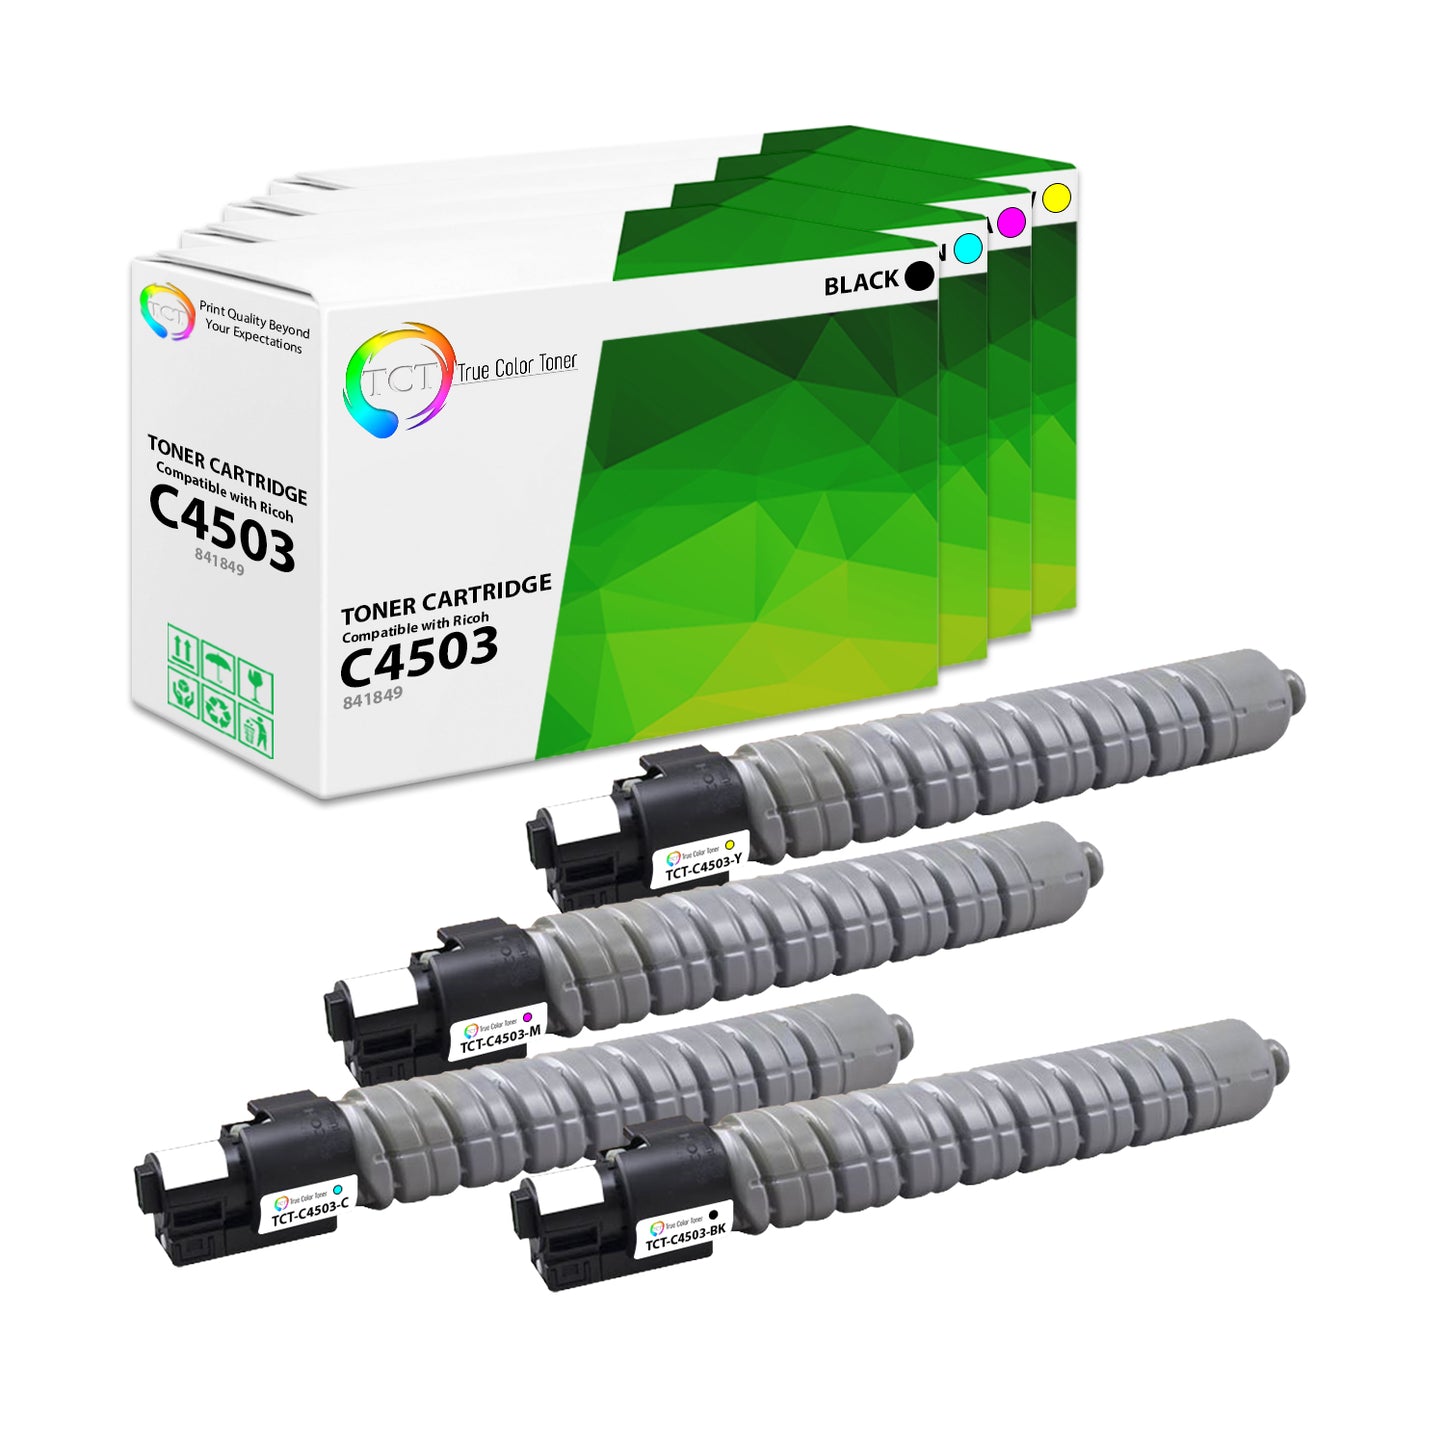 TCT Compatible Toner Cartridge Replacement for the Ricoh C4503 Series - 4 Pack (BK, C, M, Y)